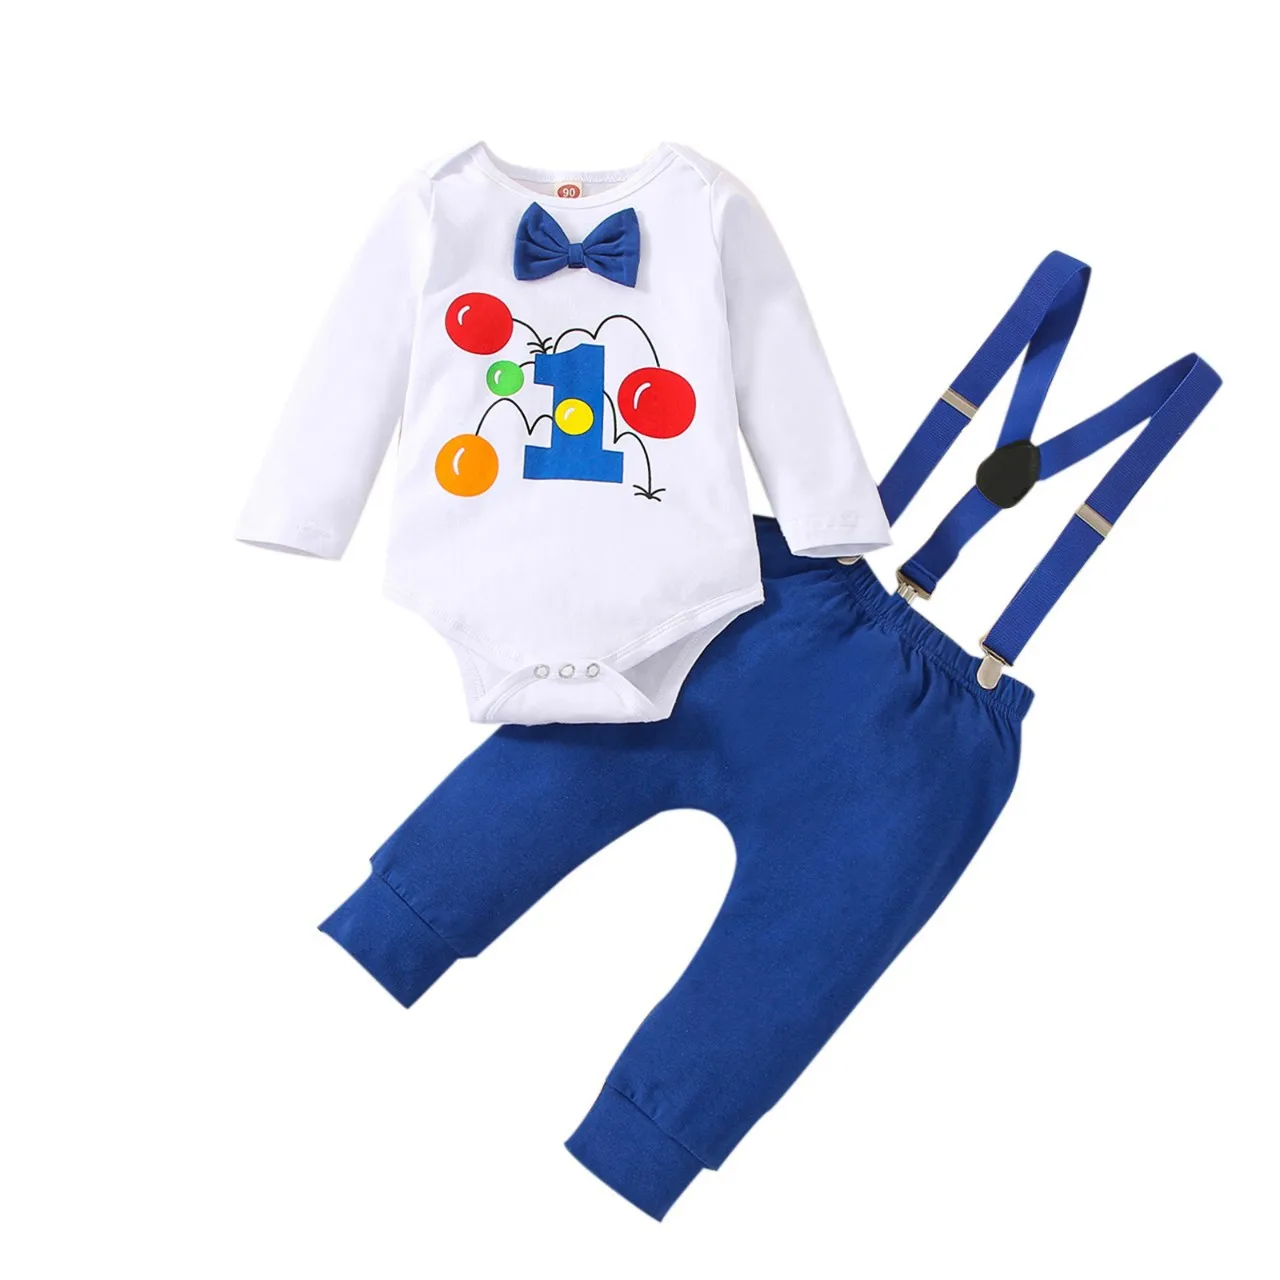 

Baby Boy Clothes NO.1 Printed Romper Long Sleeve Bodysuits with Suspender Pants First Birthday Outfit for Cake Smash Photograph